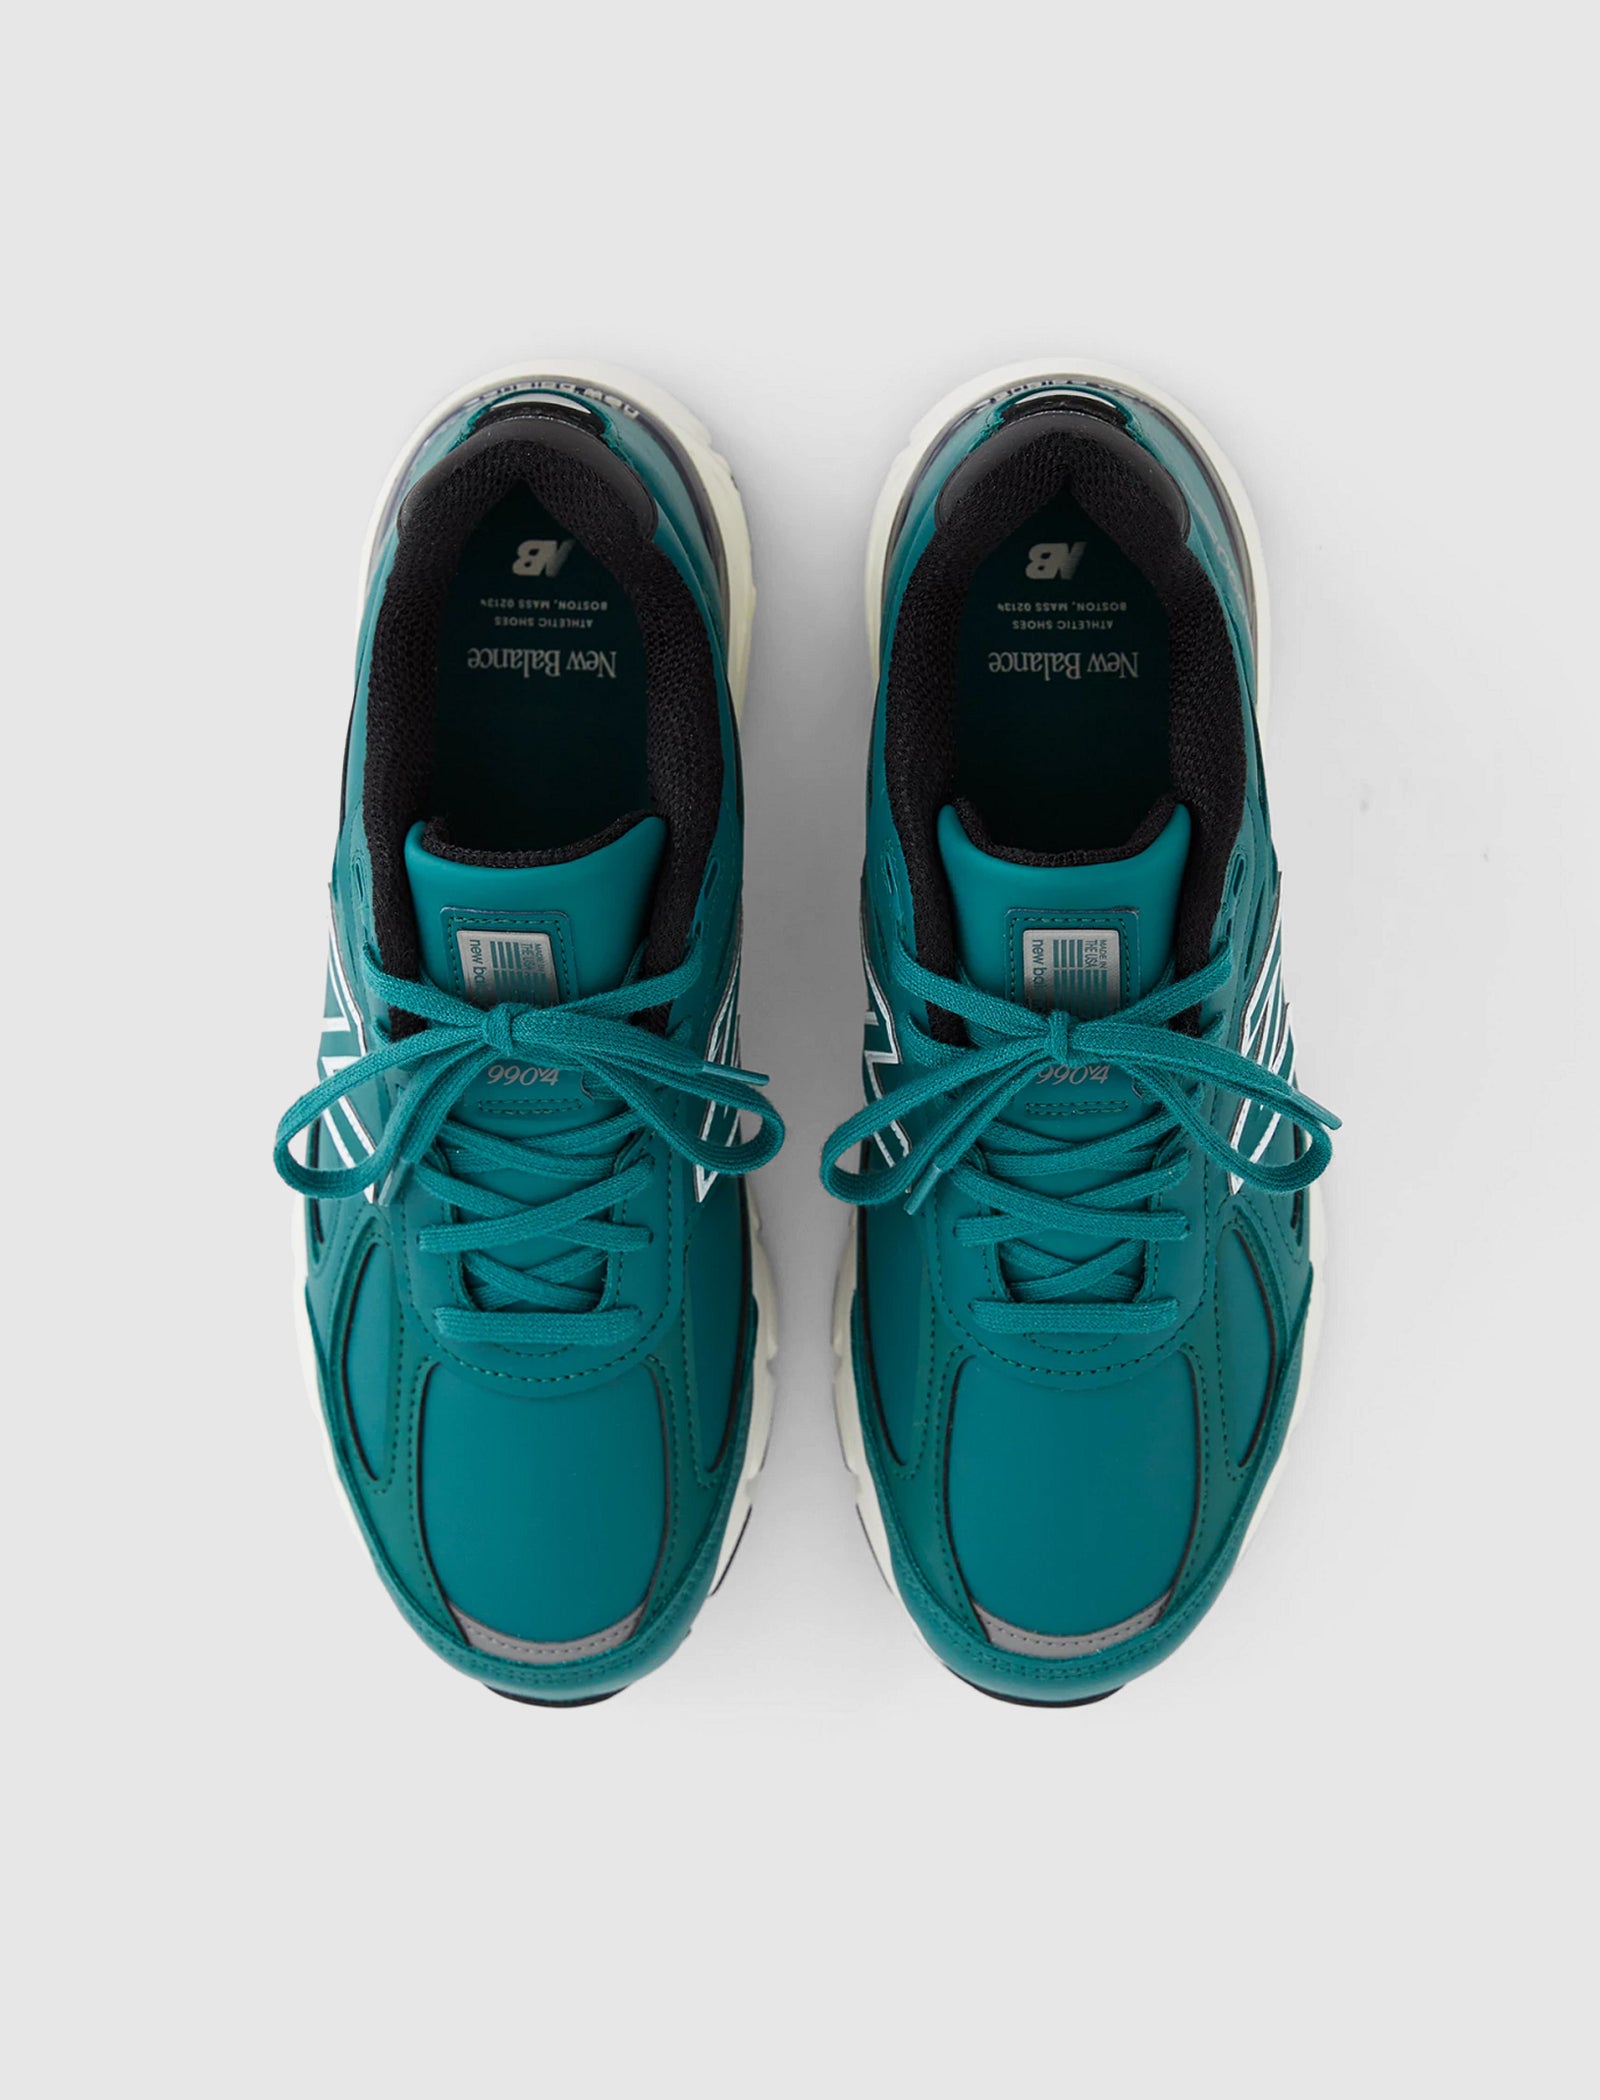 990v4 MADE IN USA "TEAL"